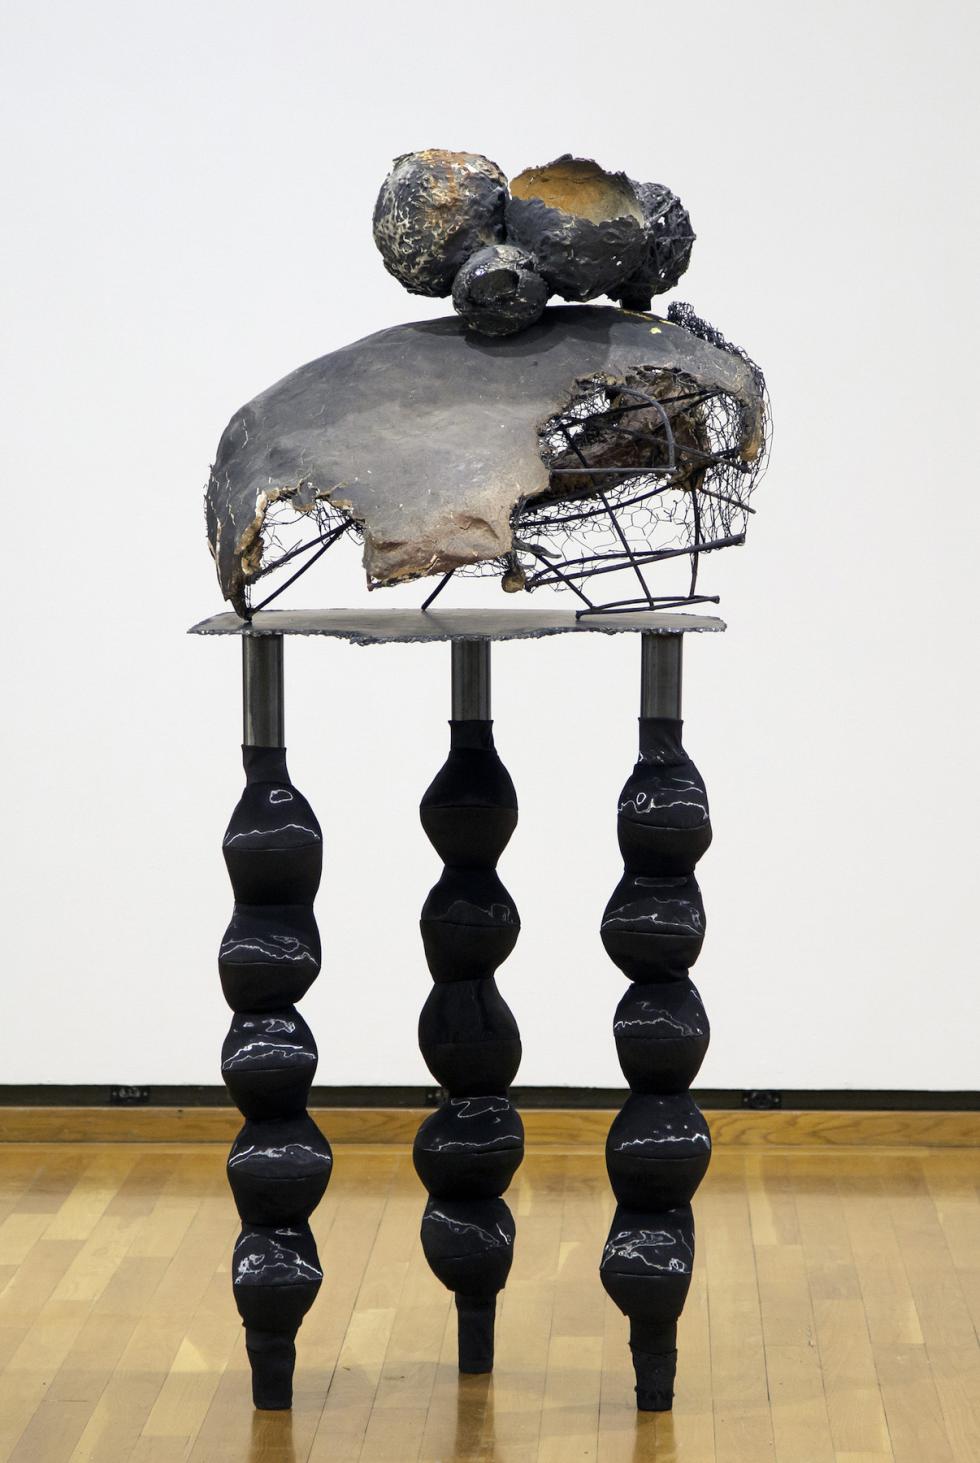 An abstract sculpture with three legs, similar to a small table, sits in a gallery with wooden floors and white walls. The sculpture contains chicken wire, shiny black paint, and rounded forms made of paper maché. 